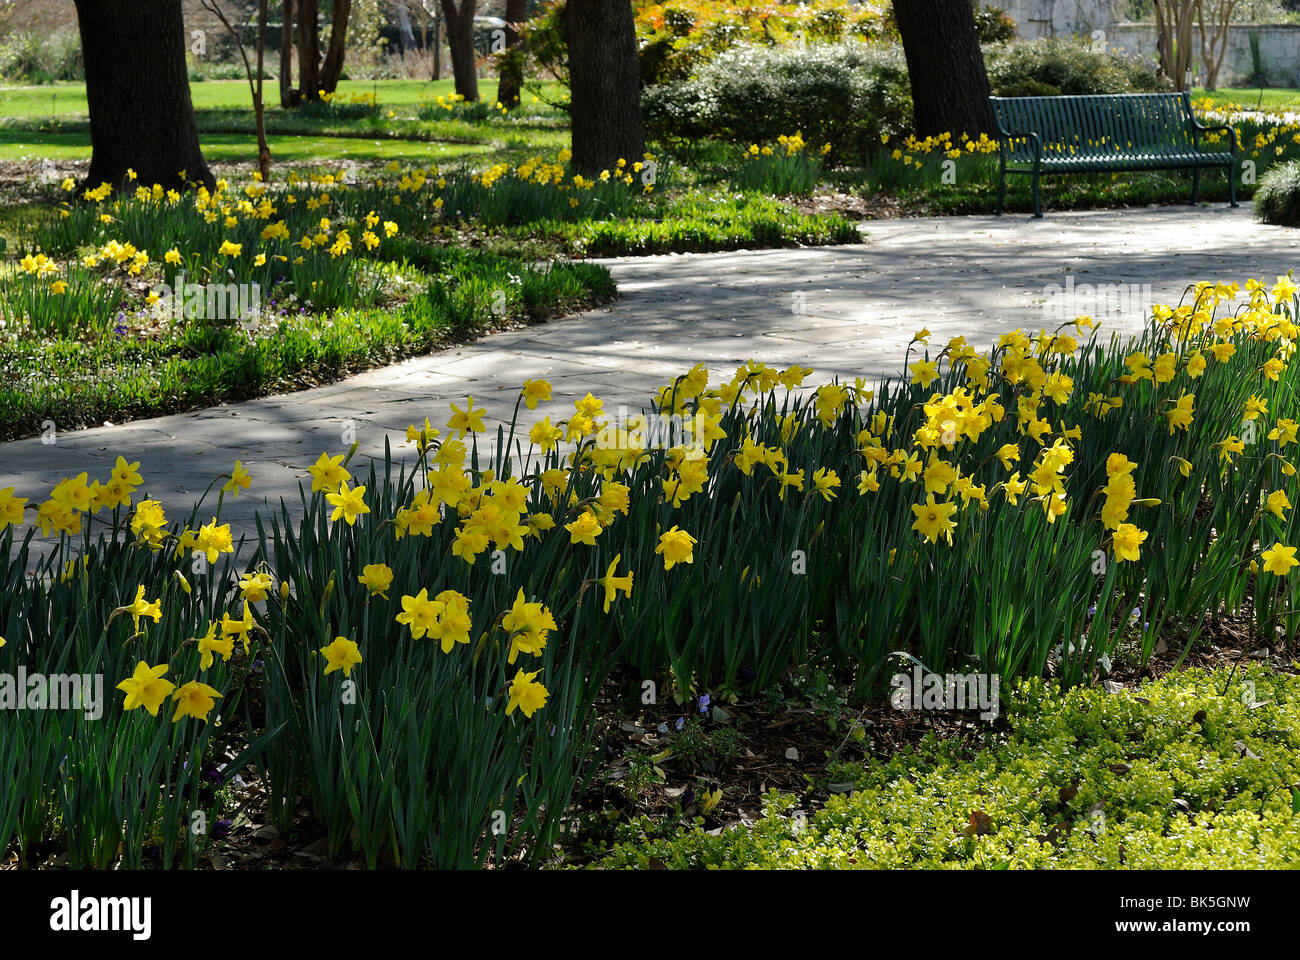 Flower bed of daffodils blooming in the Dallas Arboretum Park, Texas Stock Photo